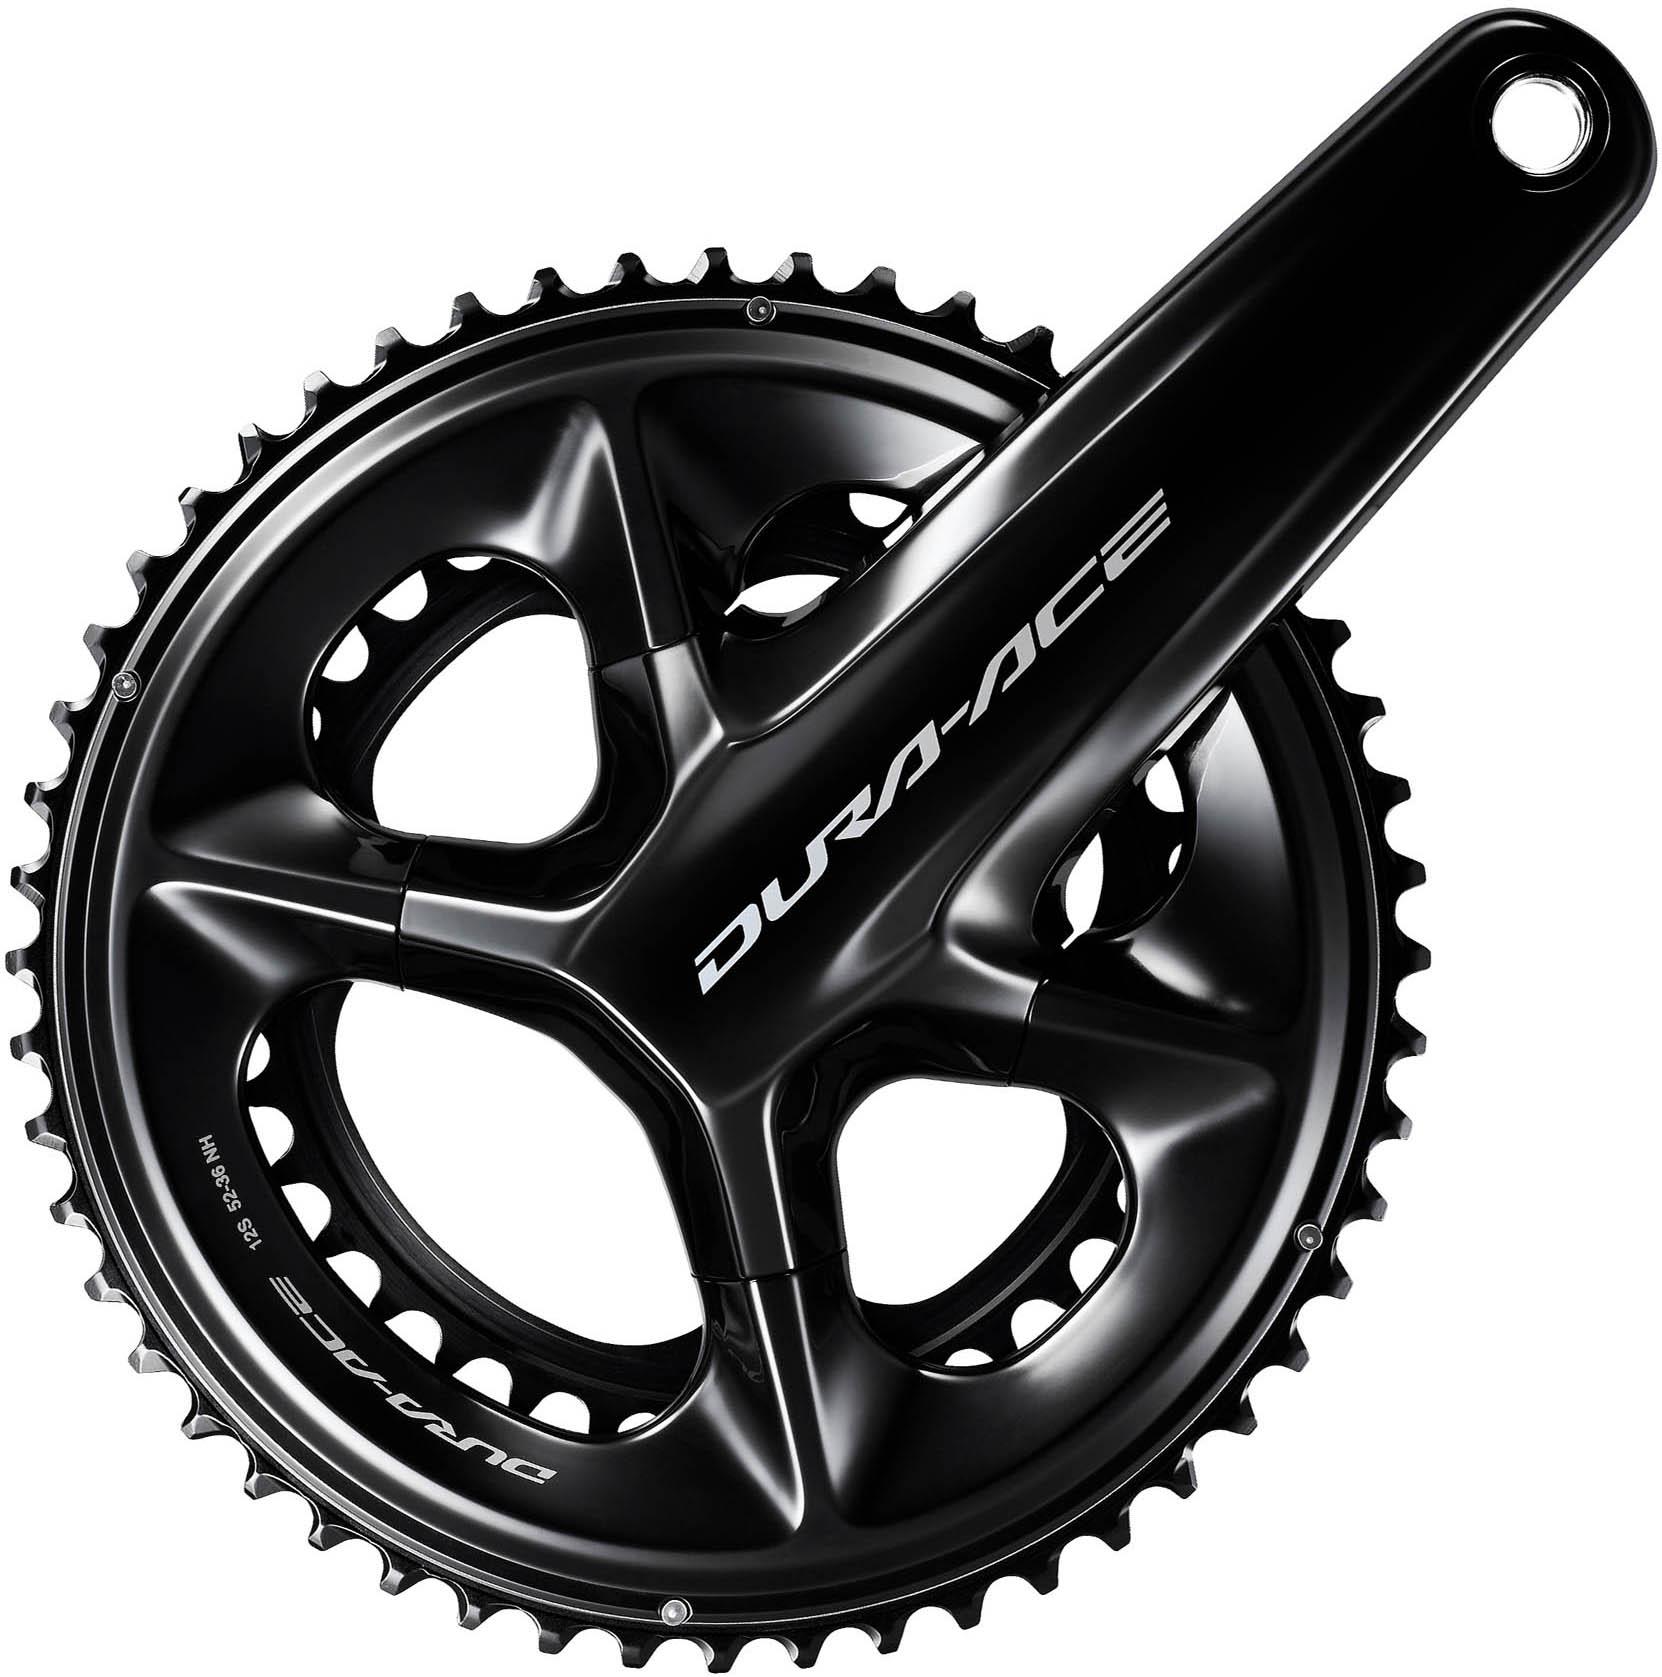 Shimano Dura-ace R9200 12 Speed Chainset  Black